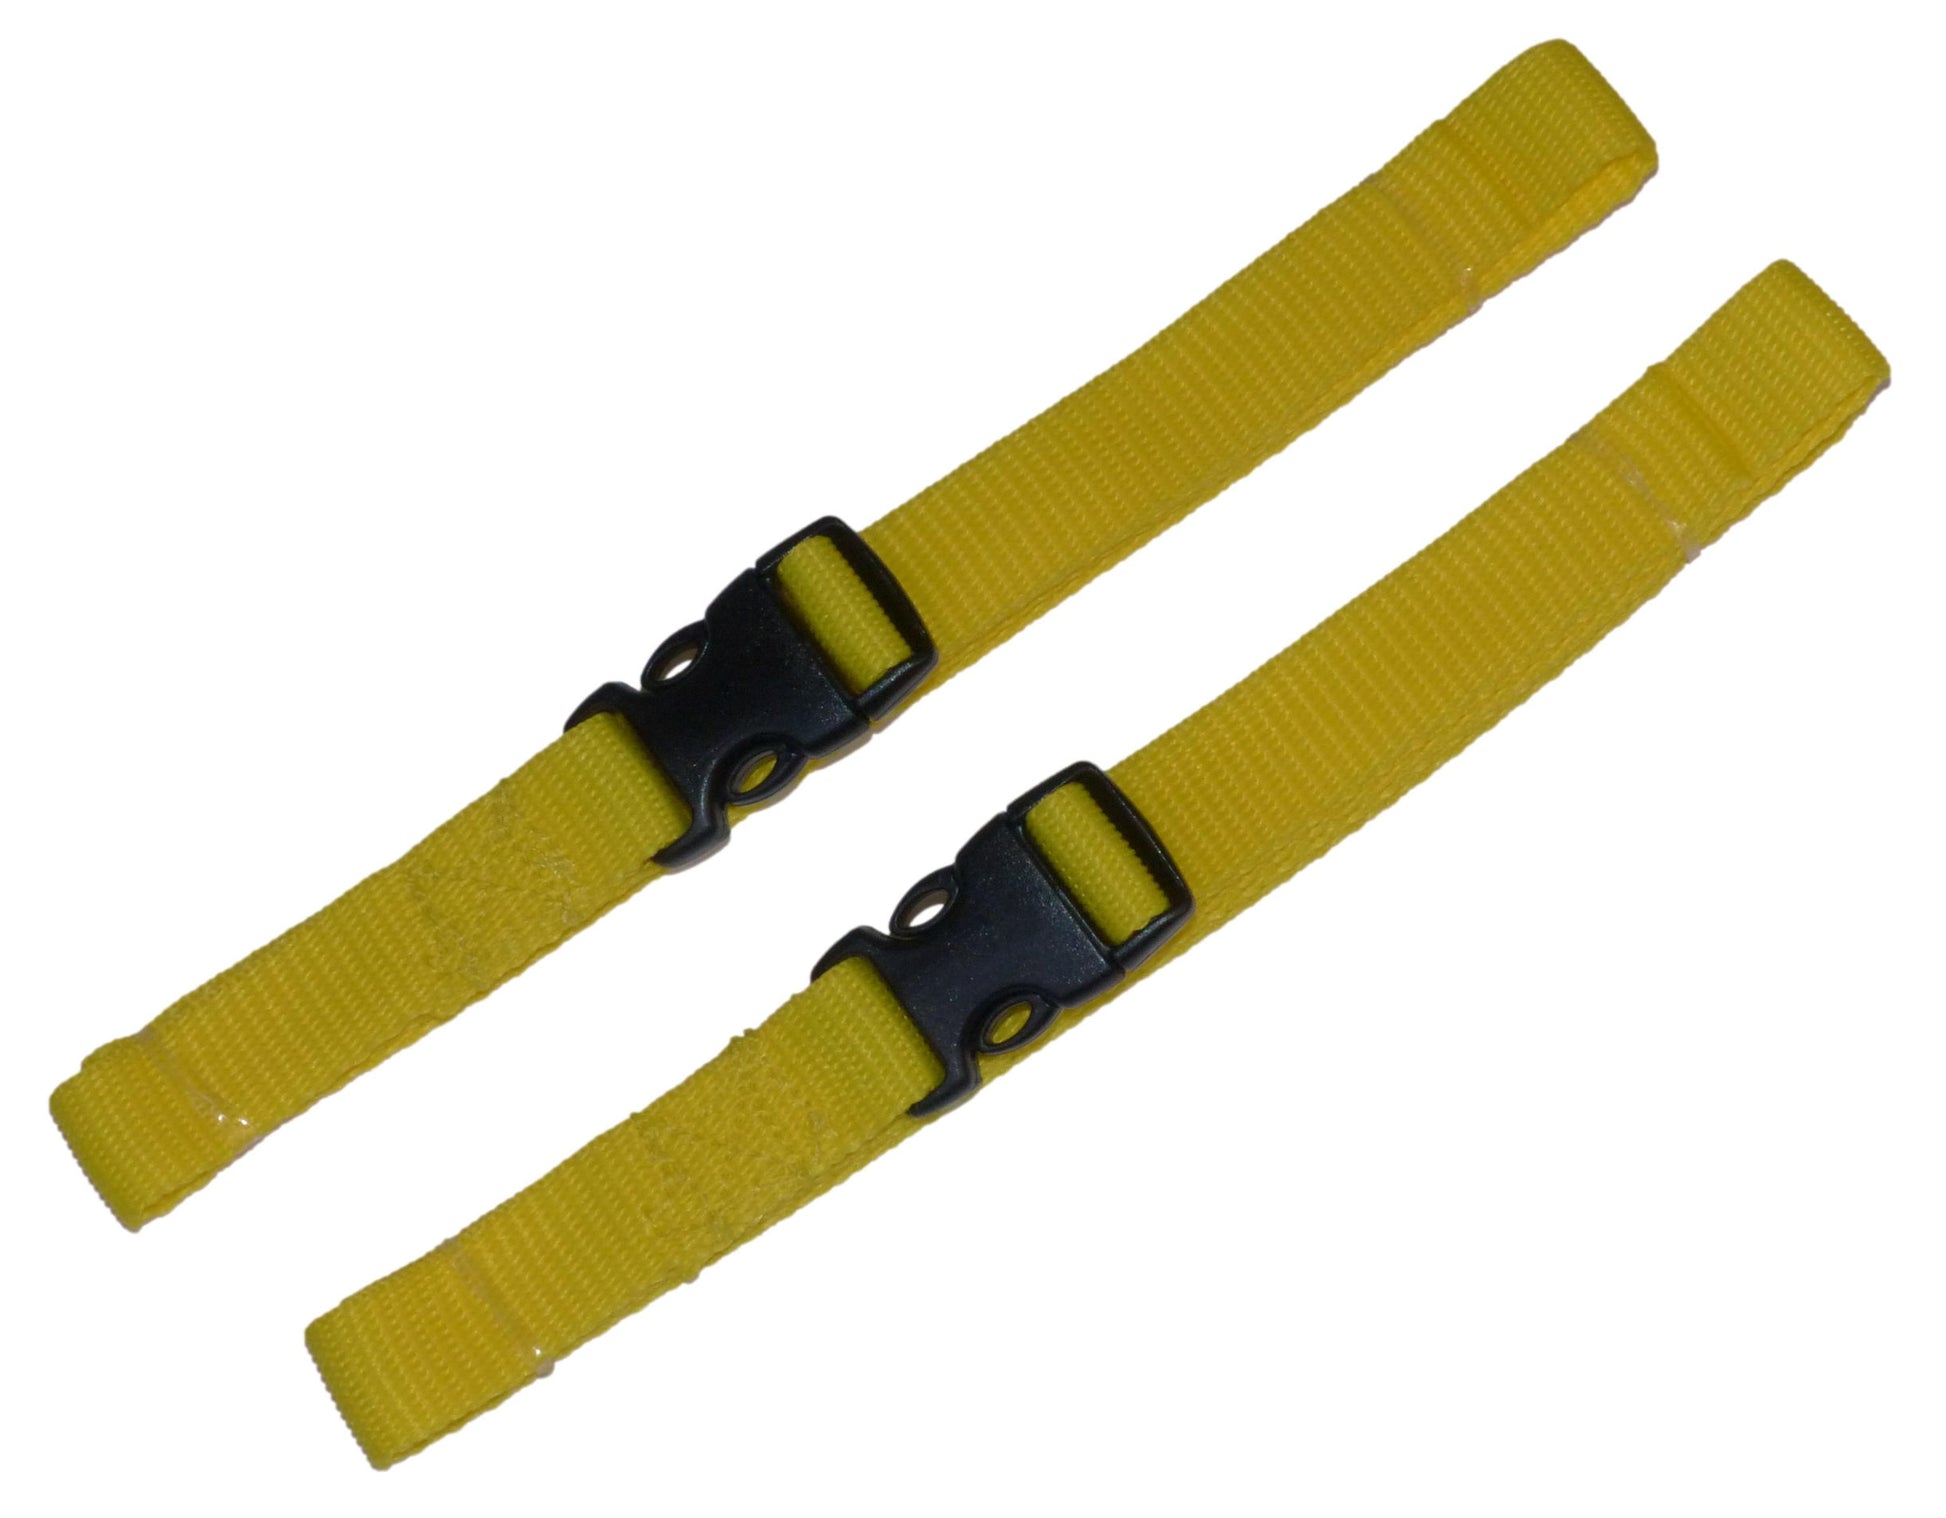 Benristraps 19mm Webbing Strap with Quick Release Buckle (Pair) in yellow (3)